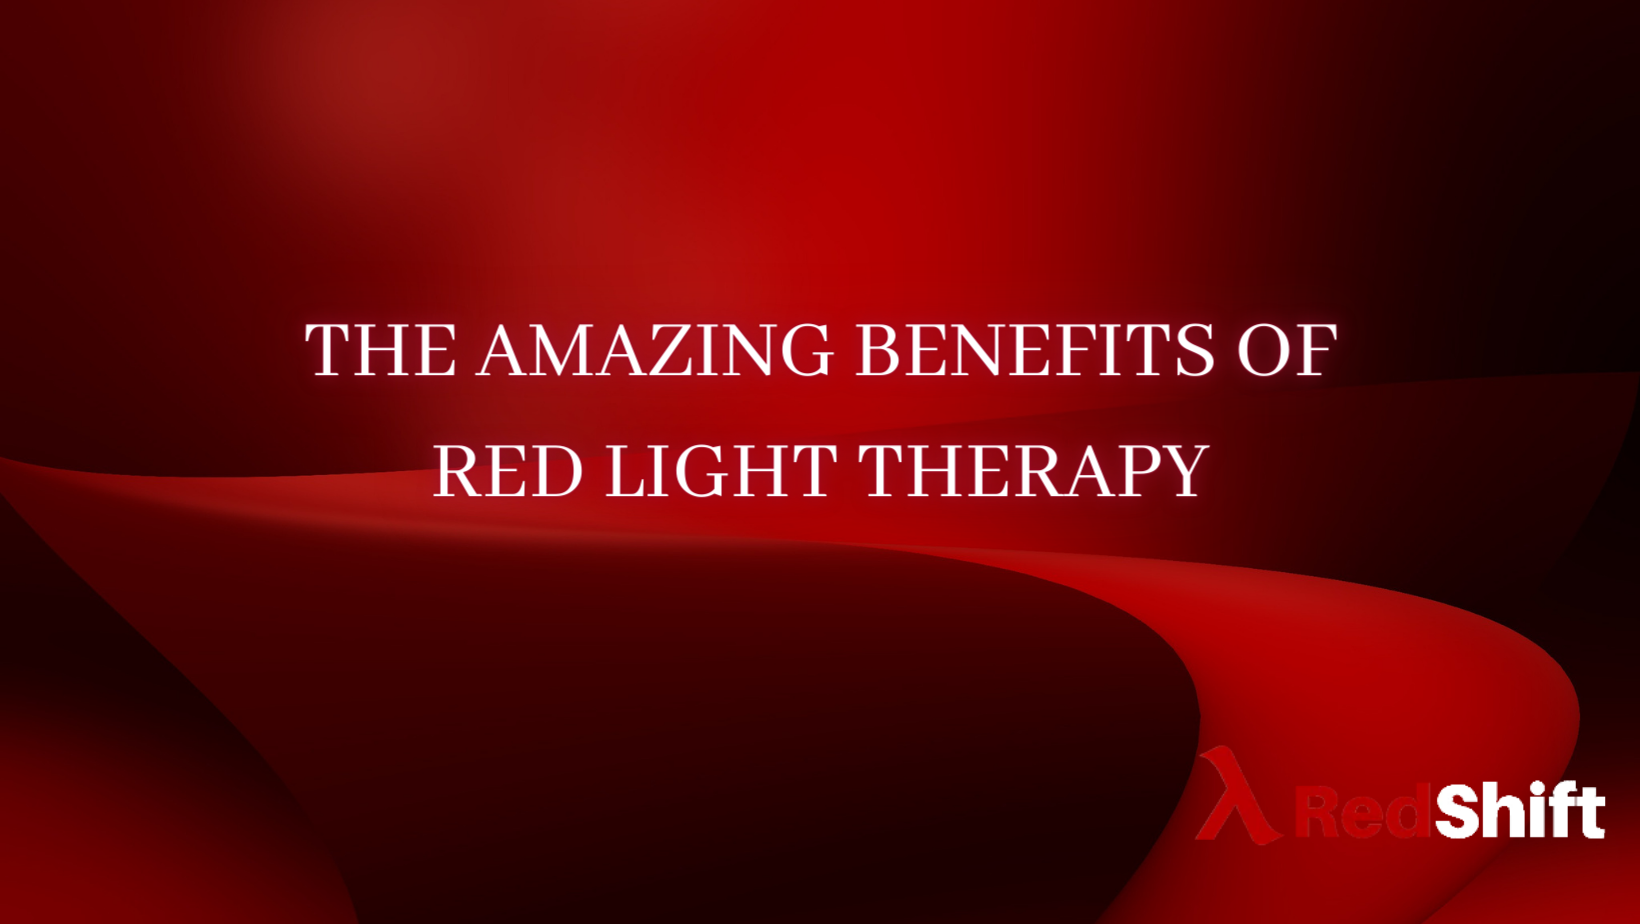 What Are the Effects of Red Light Therapy?